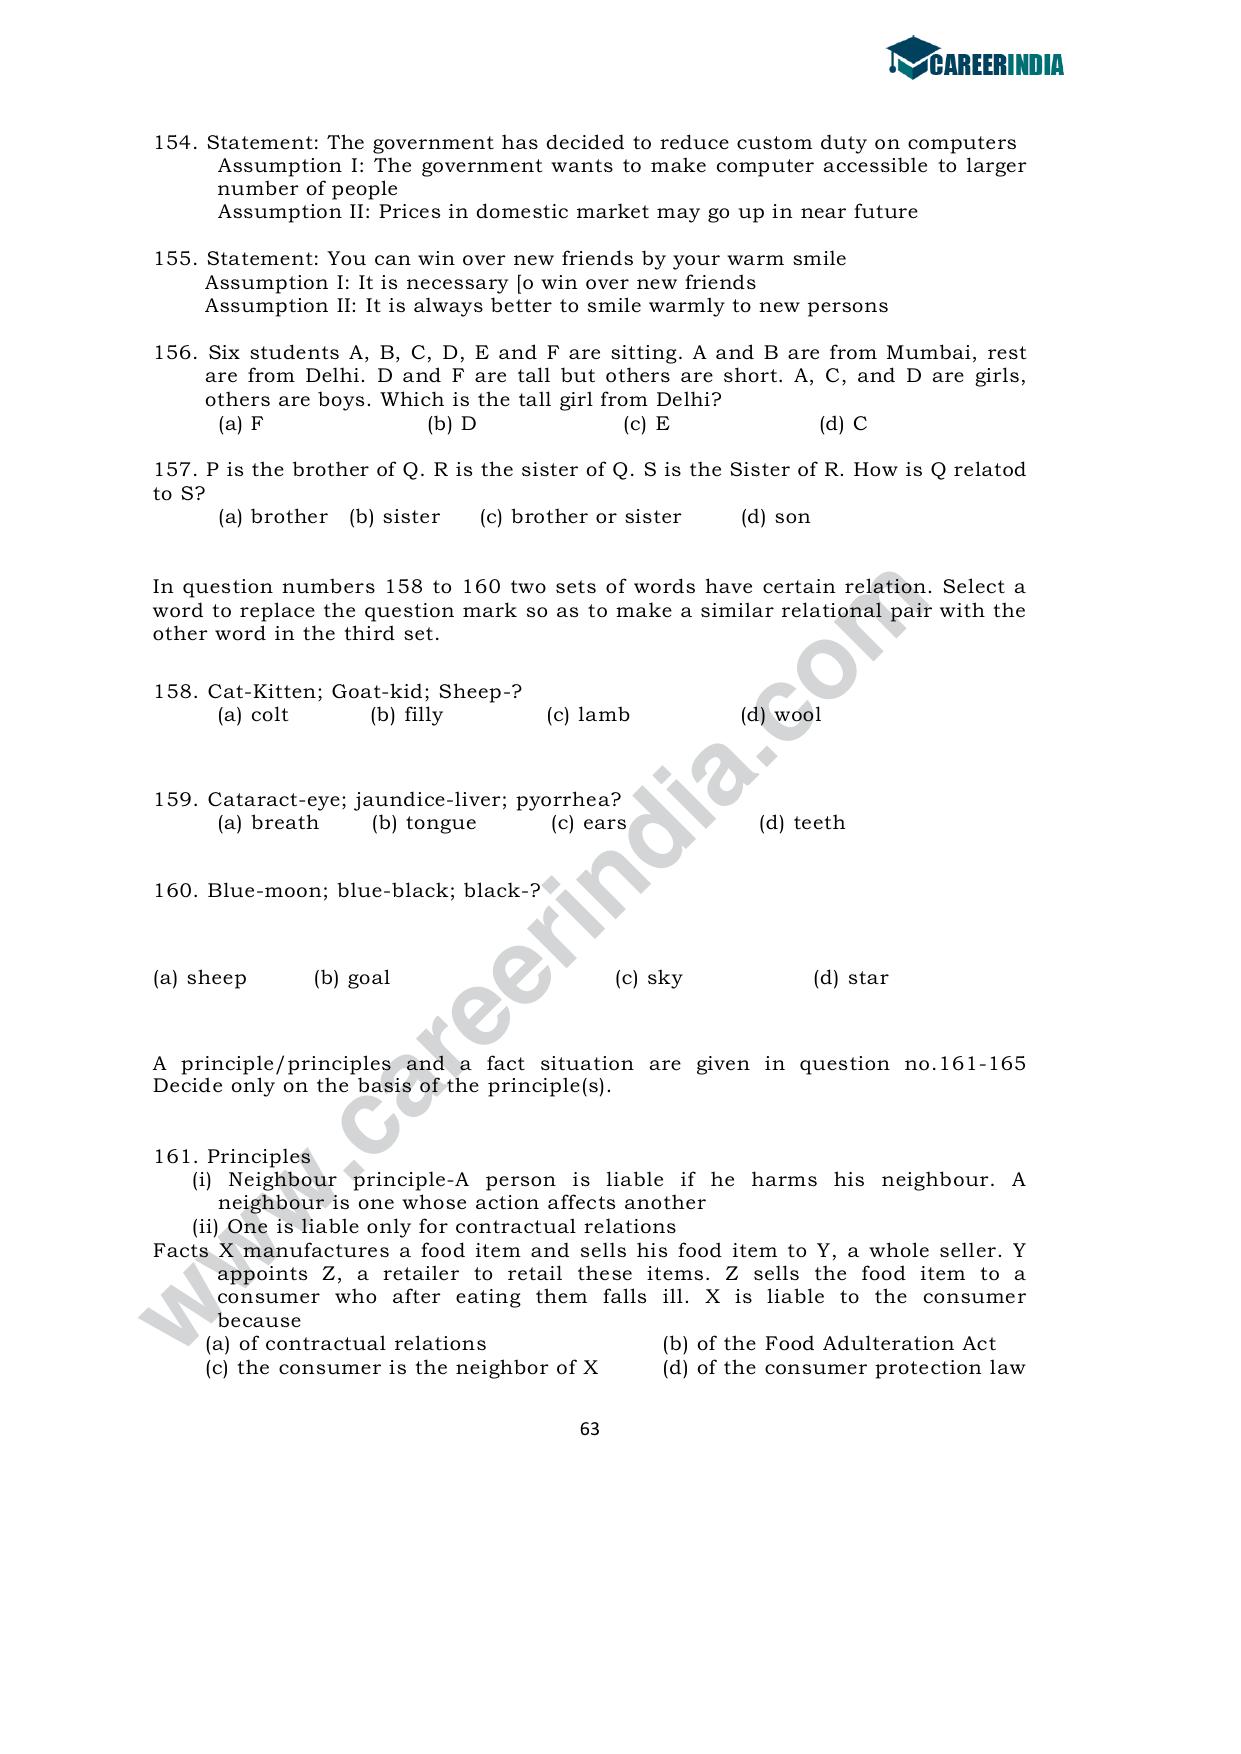 CLAT 2010 UG Sample Question Paper - Page 16